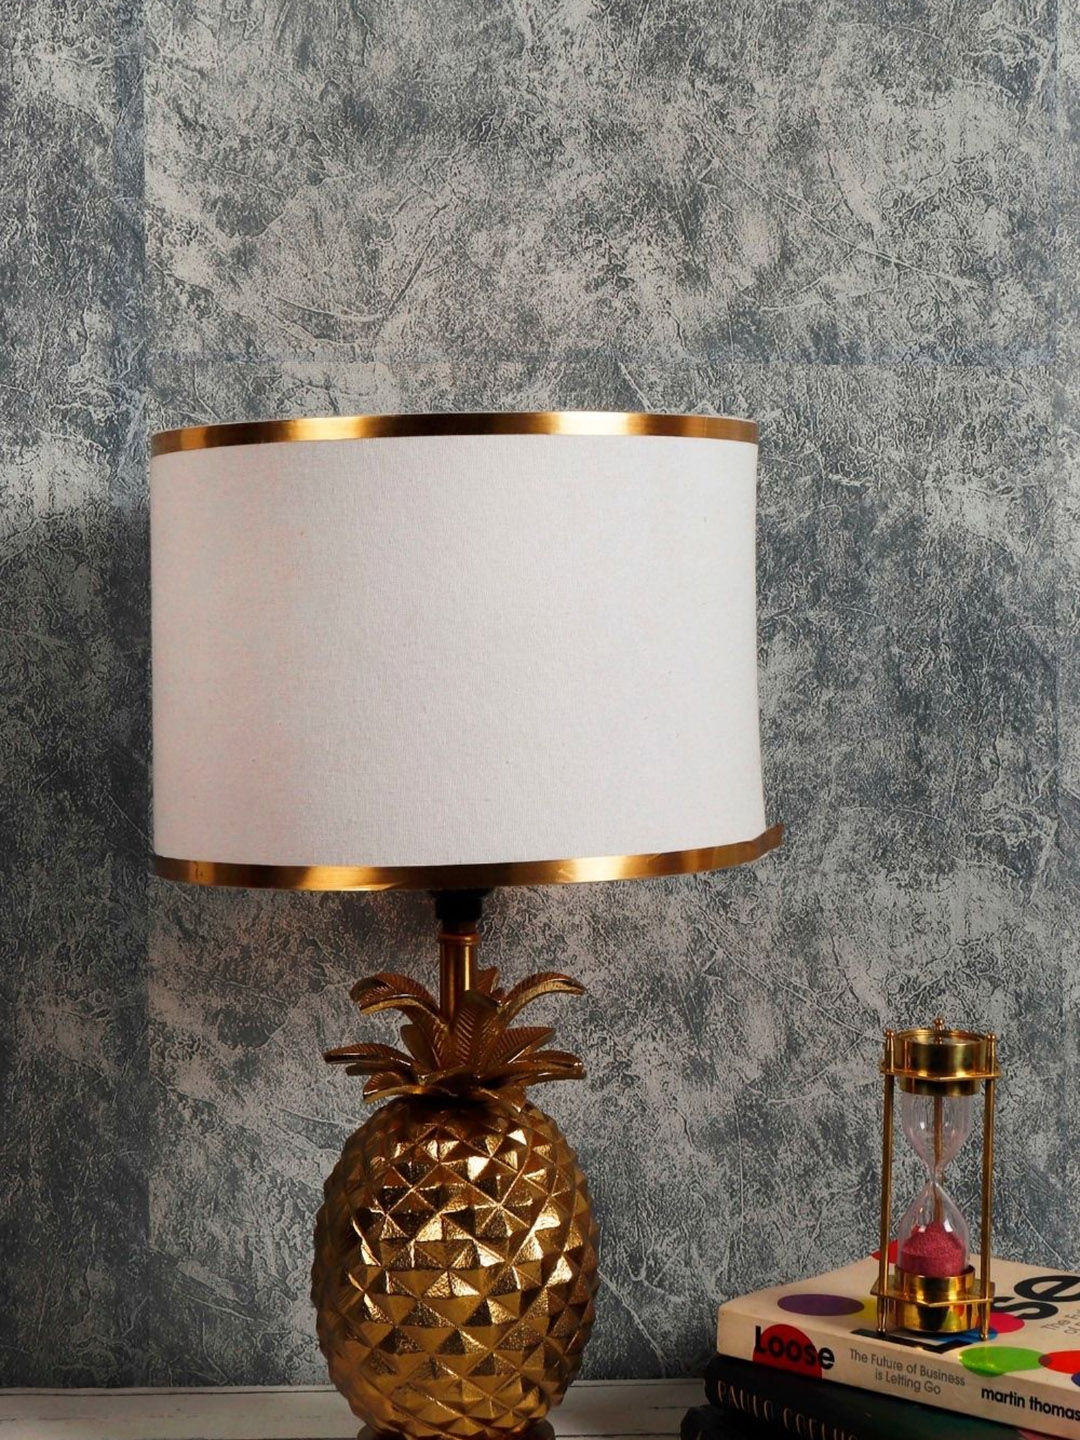 Grated Ginger White & Gold-Toned Colourblocked Handcrafted Bedside Lamp